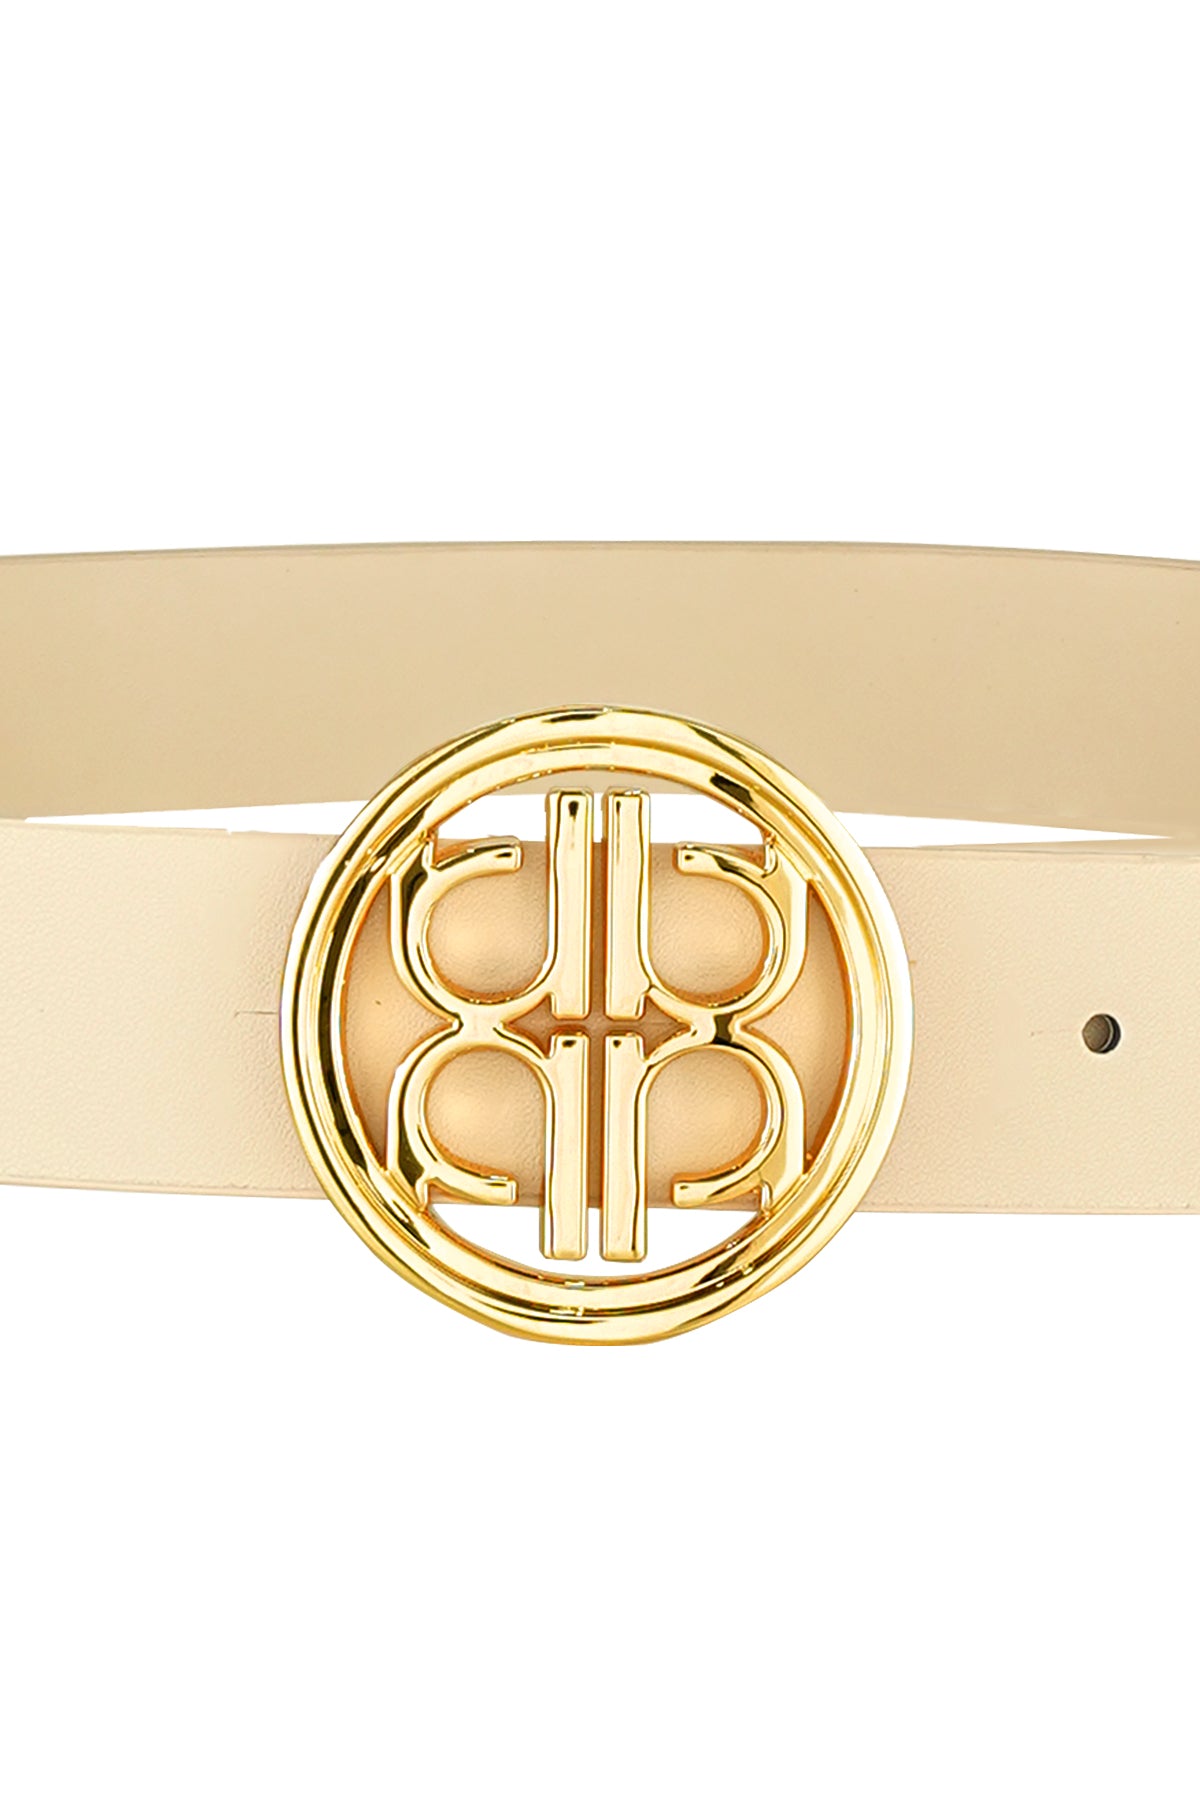 The Camille Belt Small - Beige